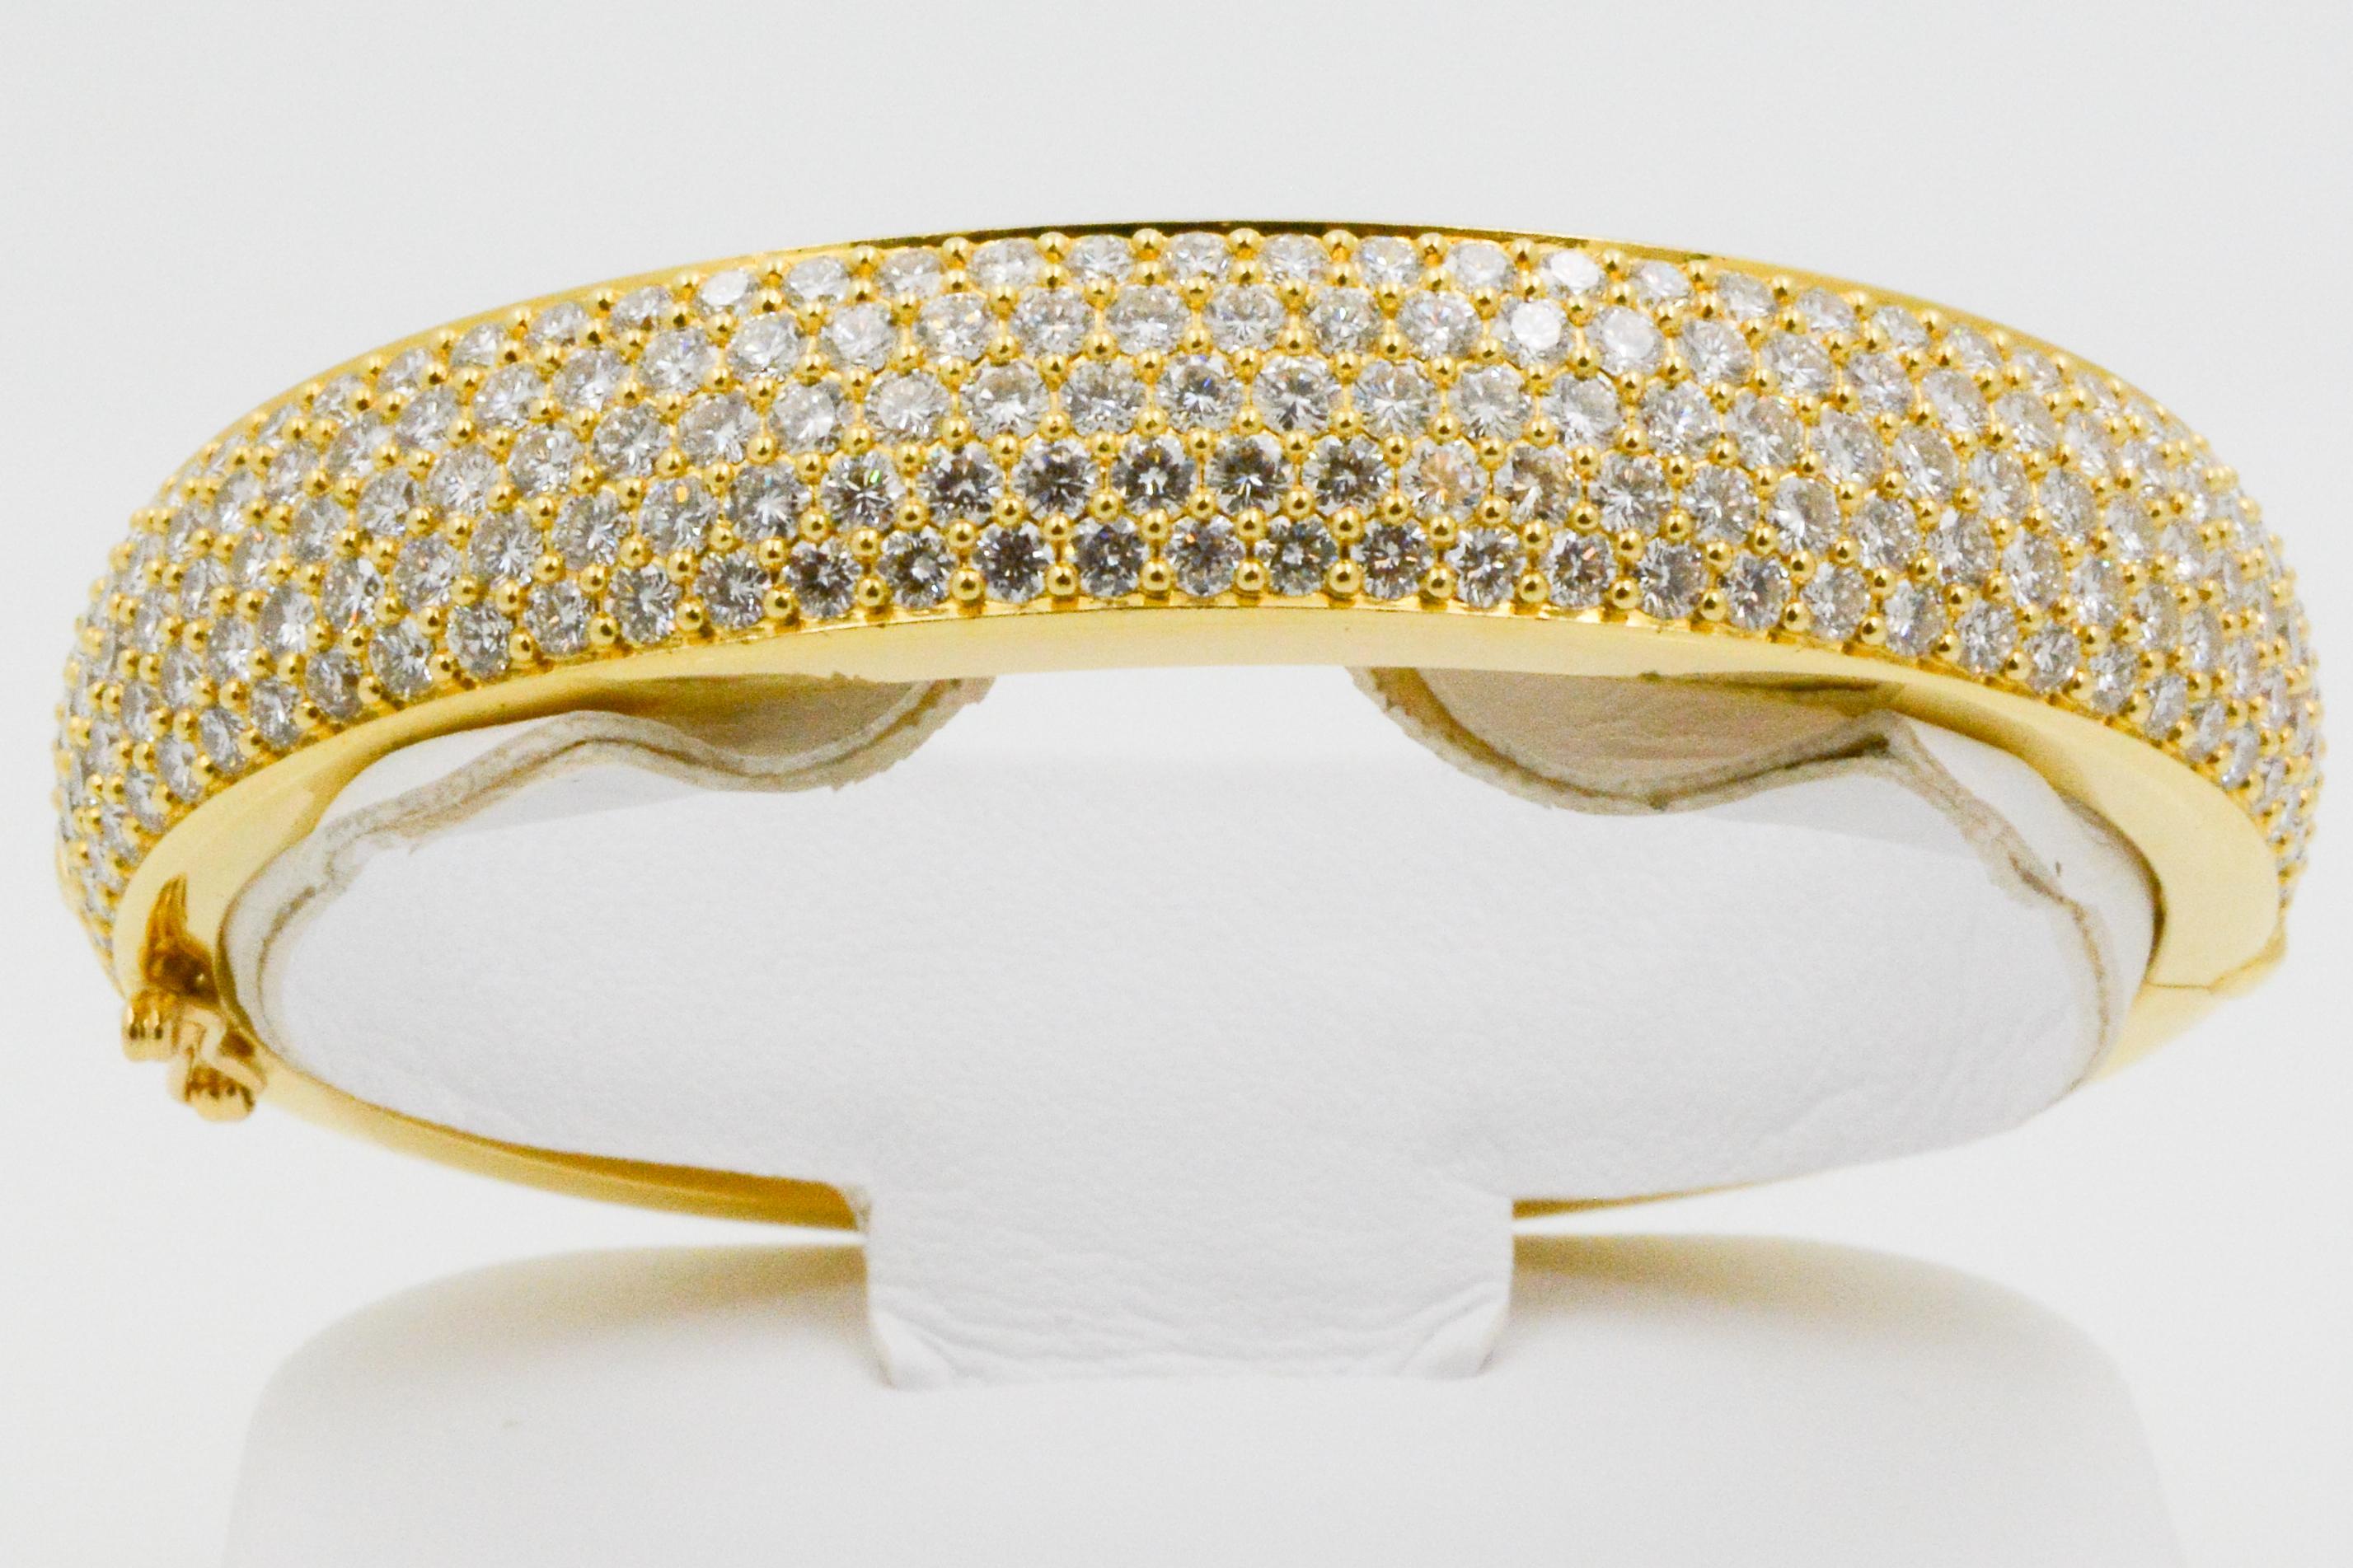 This 18 karat yellow gold Kurt Wayne bangle features a panel of rows of 193 round brilliant pave diamonds, weighing a total of approximately 10.00 carats. Glamorous and enchanting is this bangle; with a tongue & groove clasp with safety, the hinged